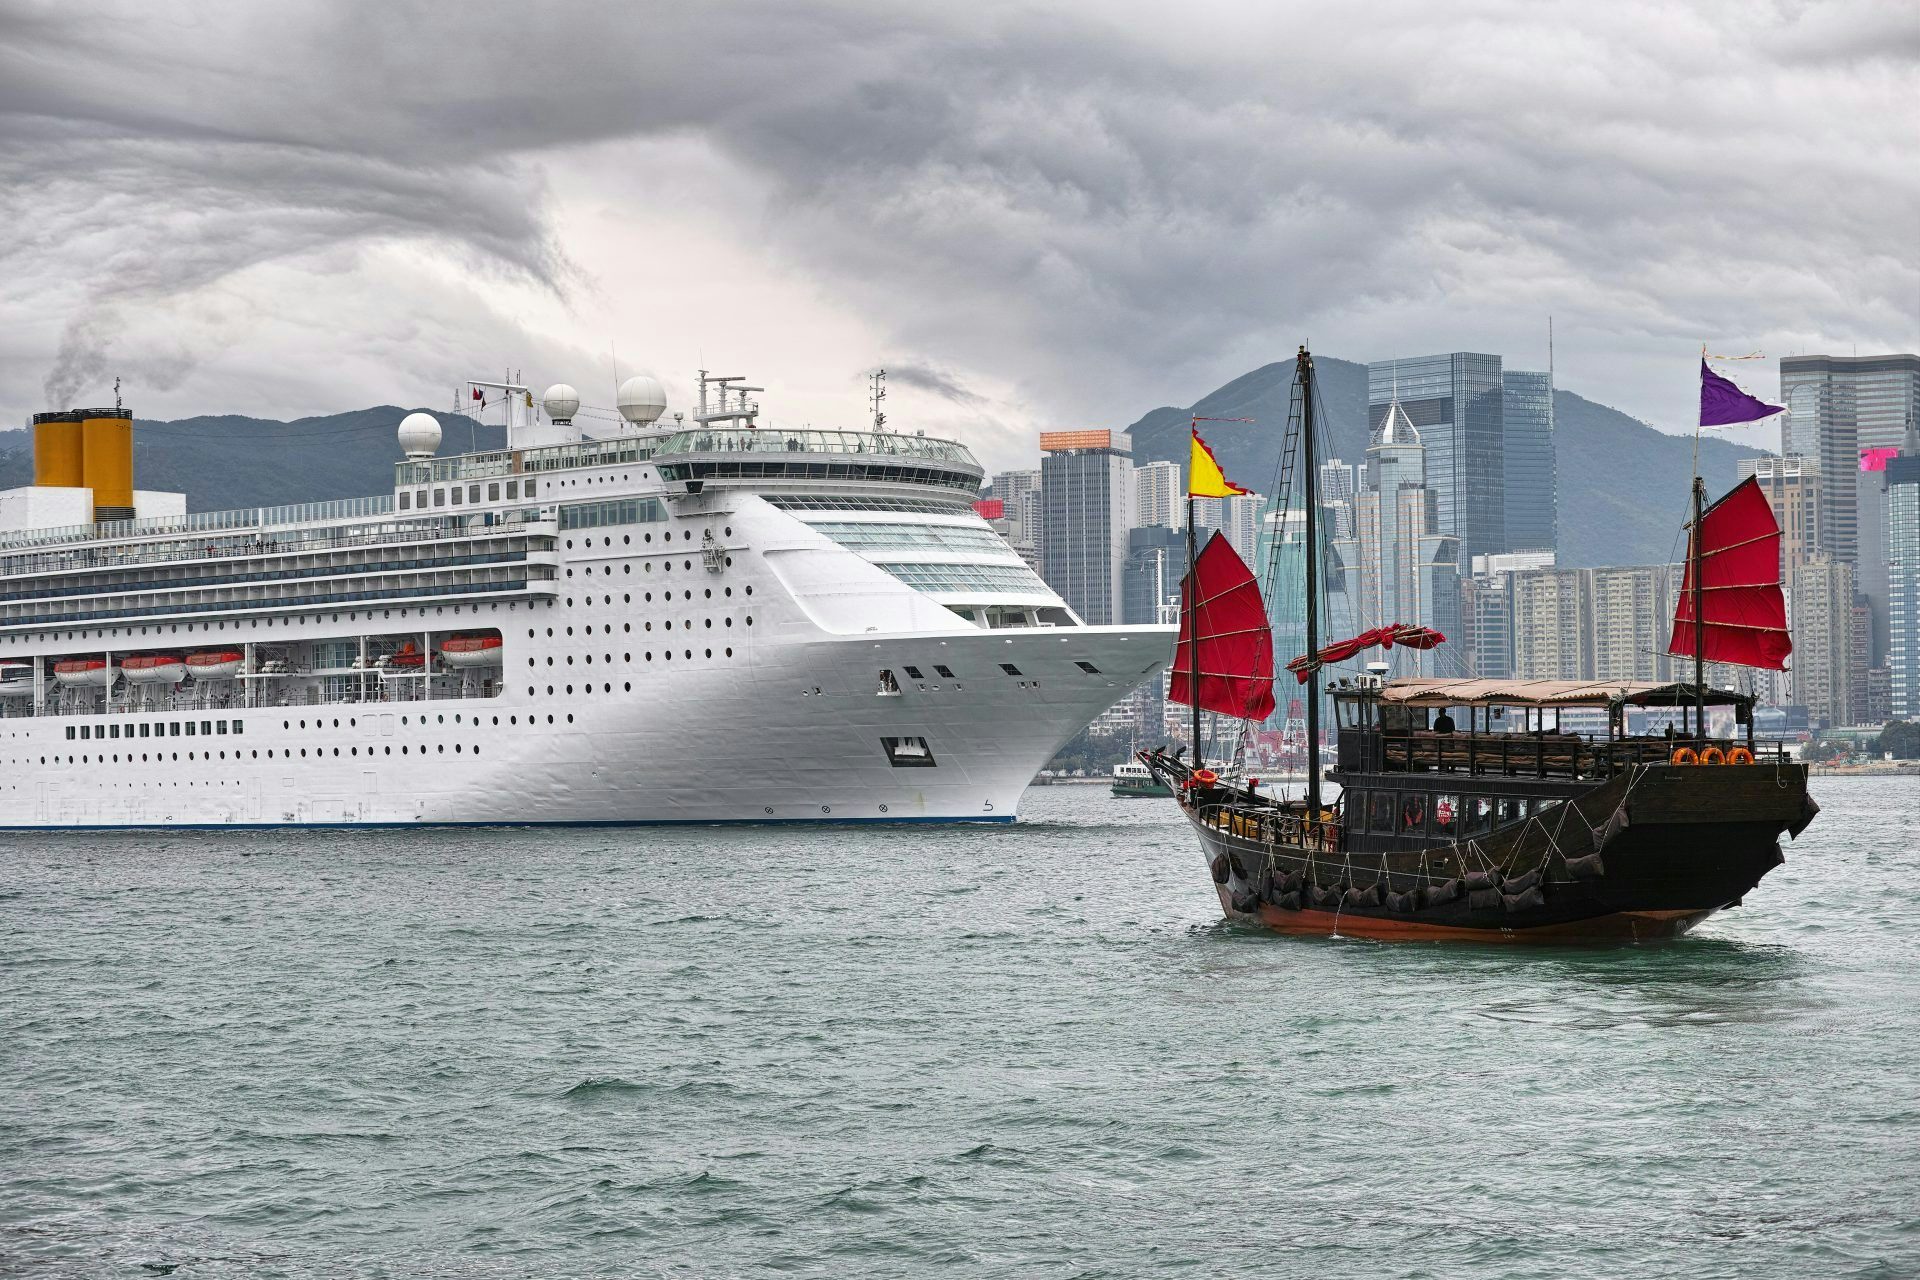 Carnival Corp Introduces Alipay Onboard its Asia Fleet to Facilitate Chinese Tourist Spending